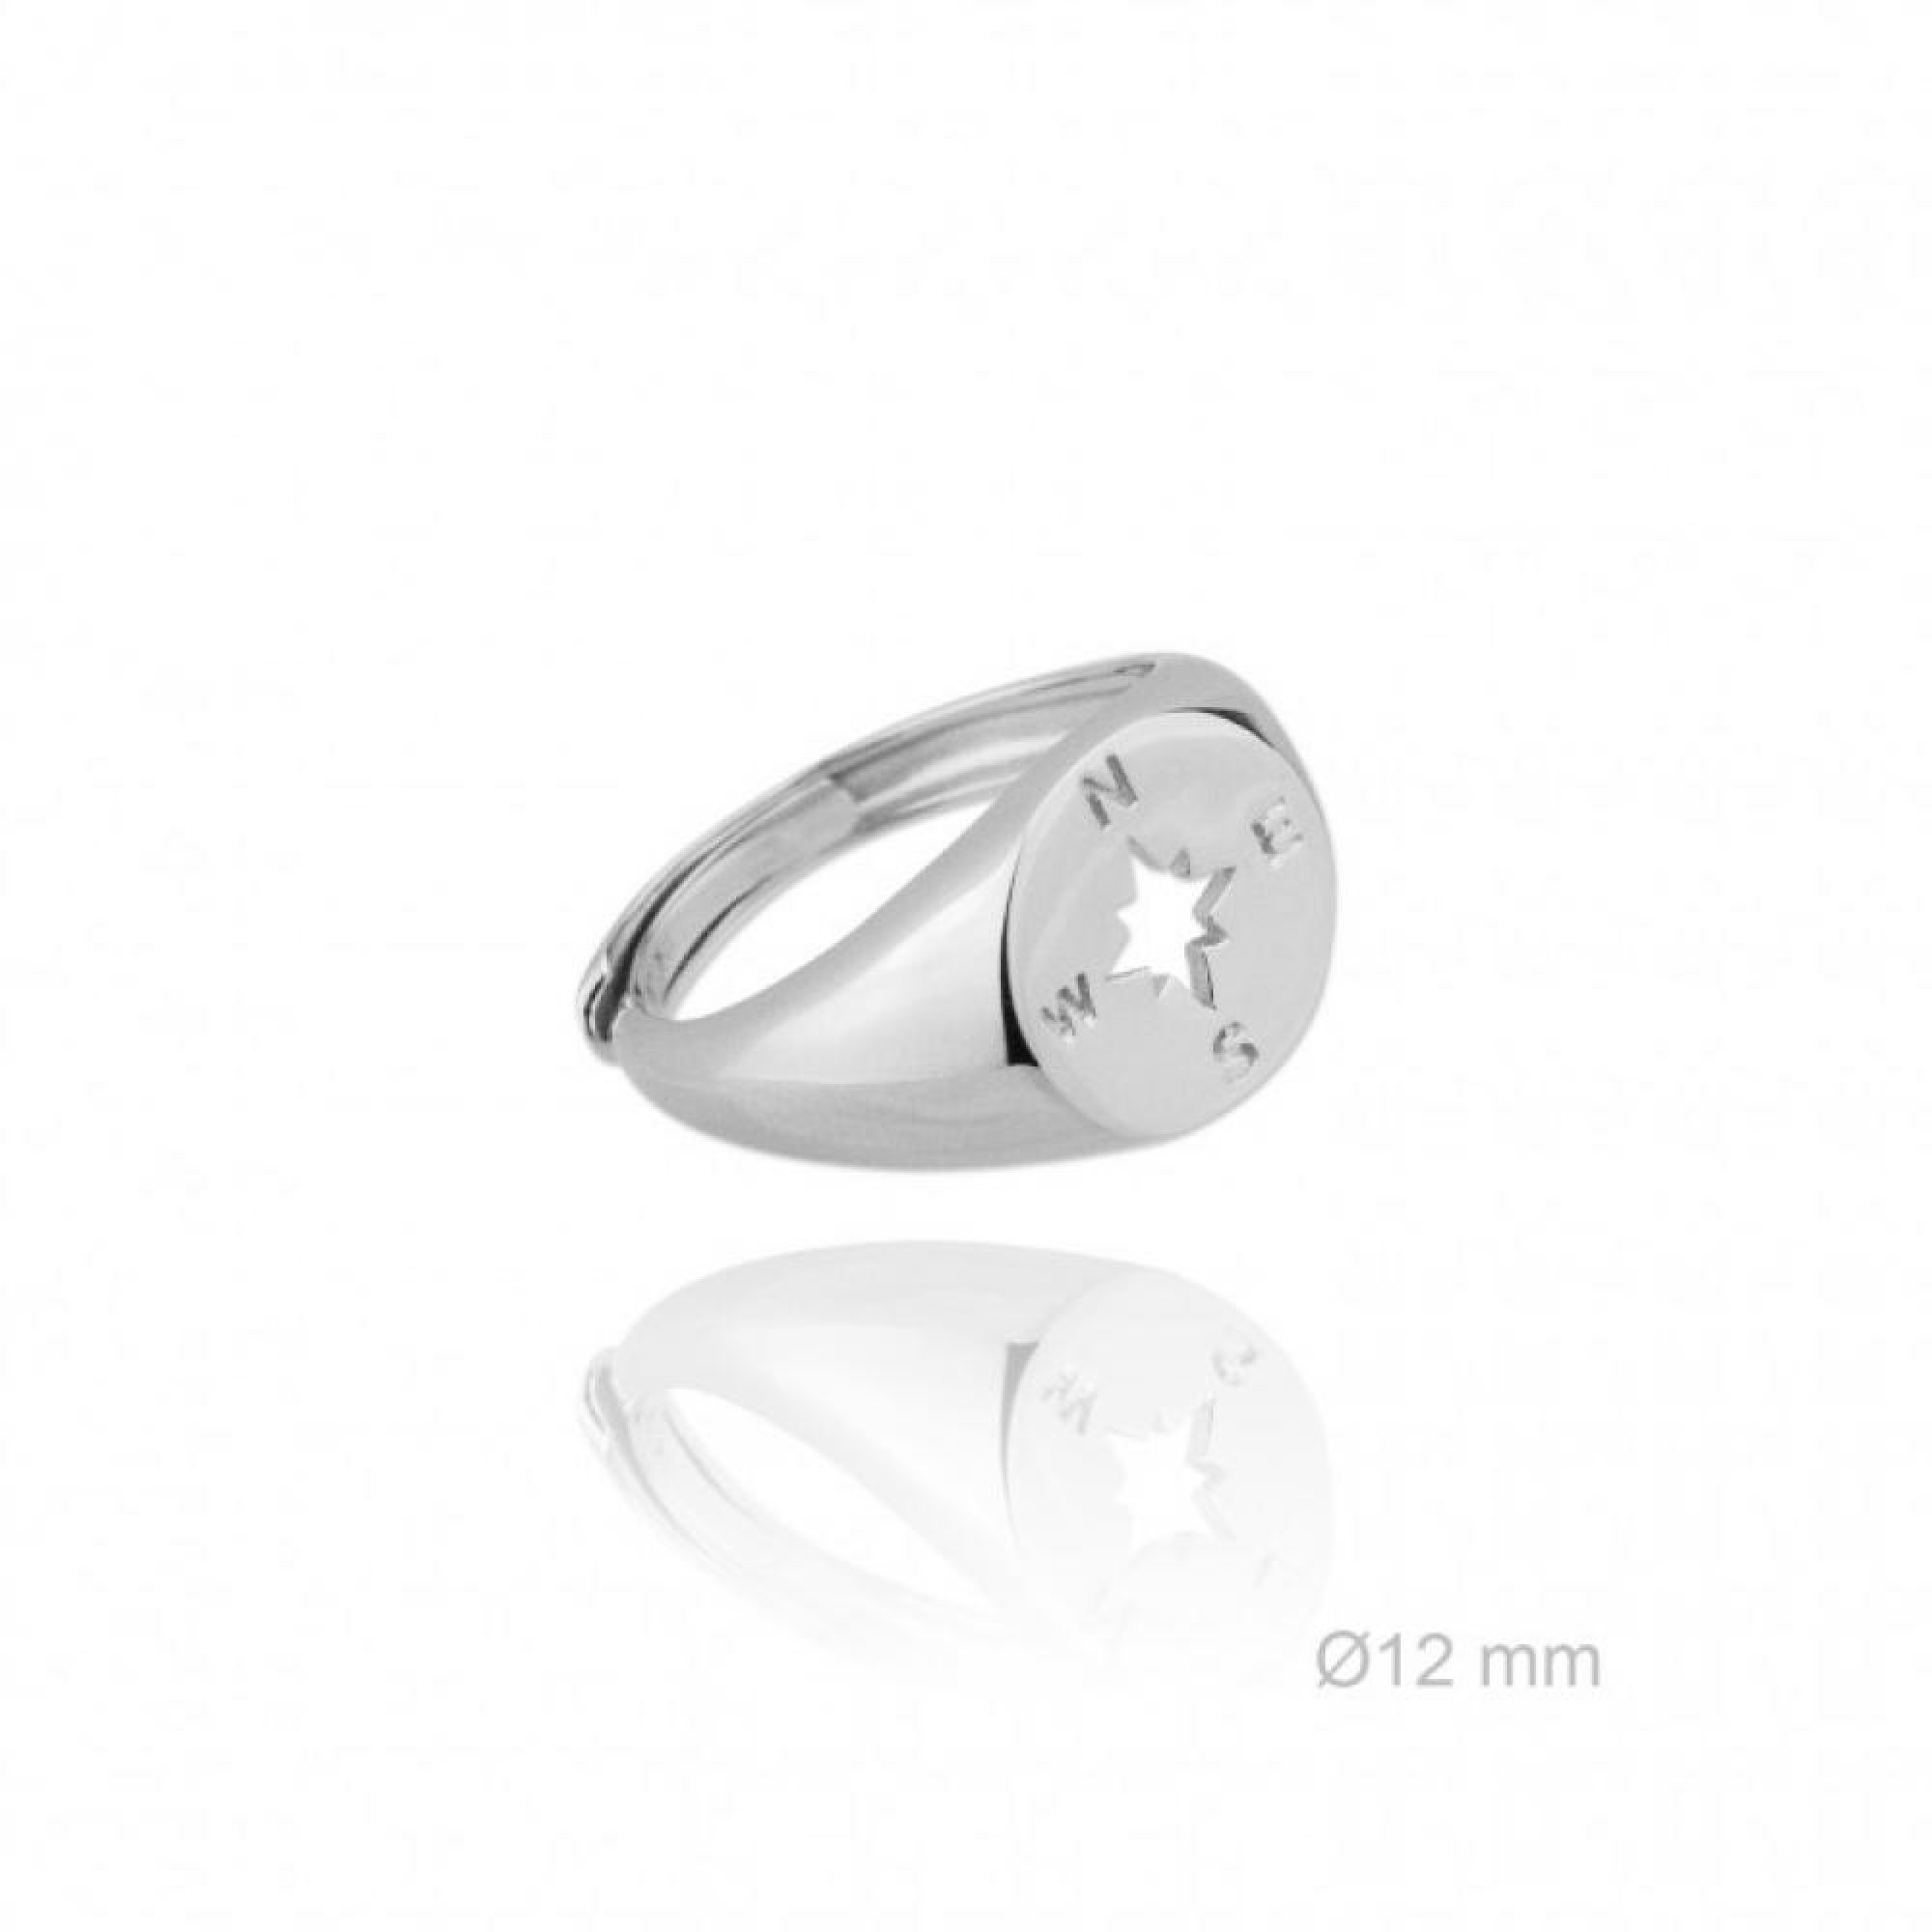 Silver compass ring